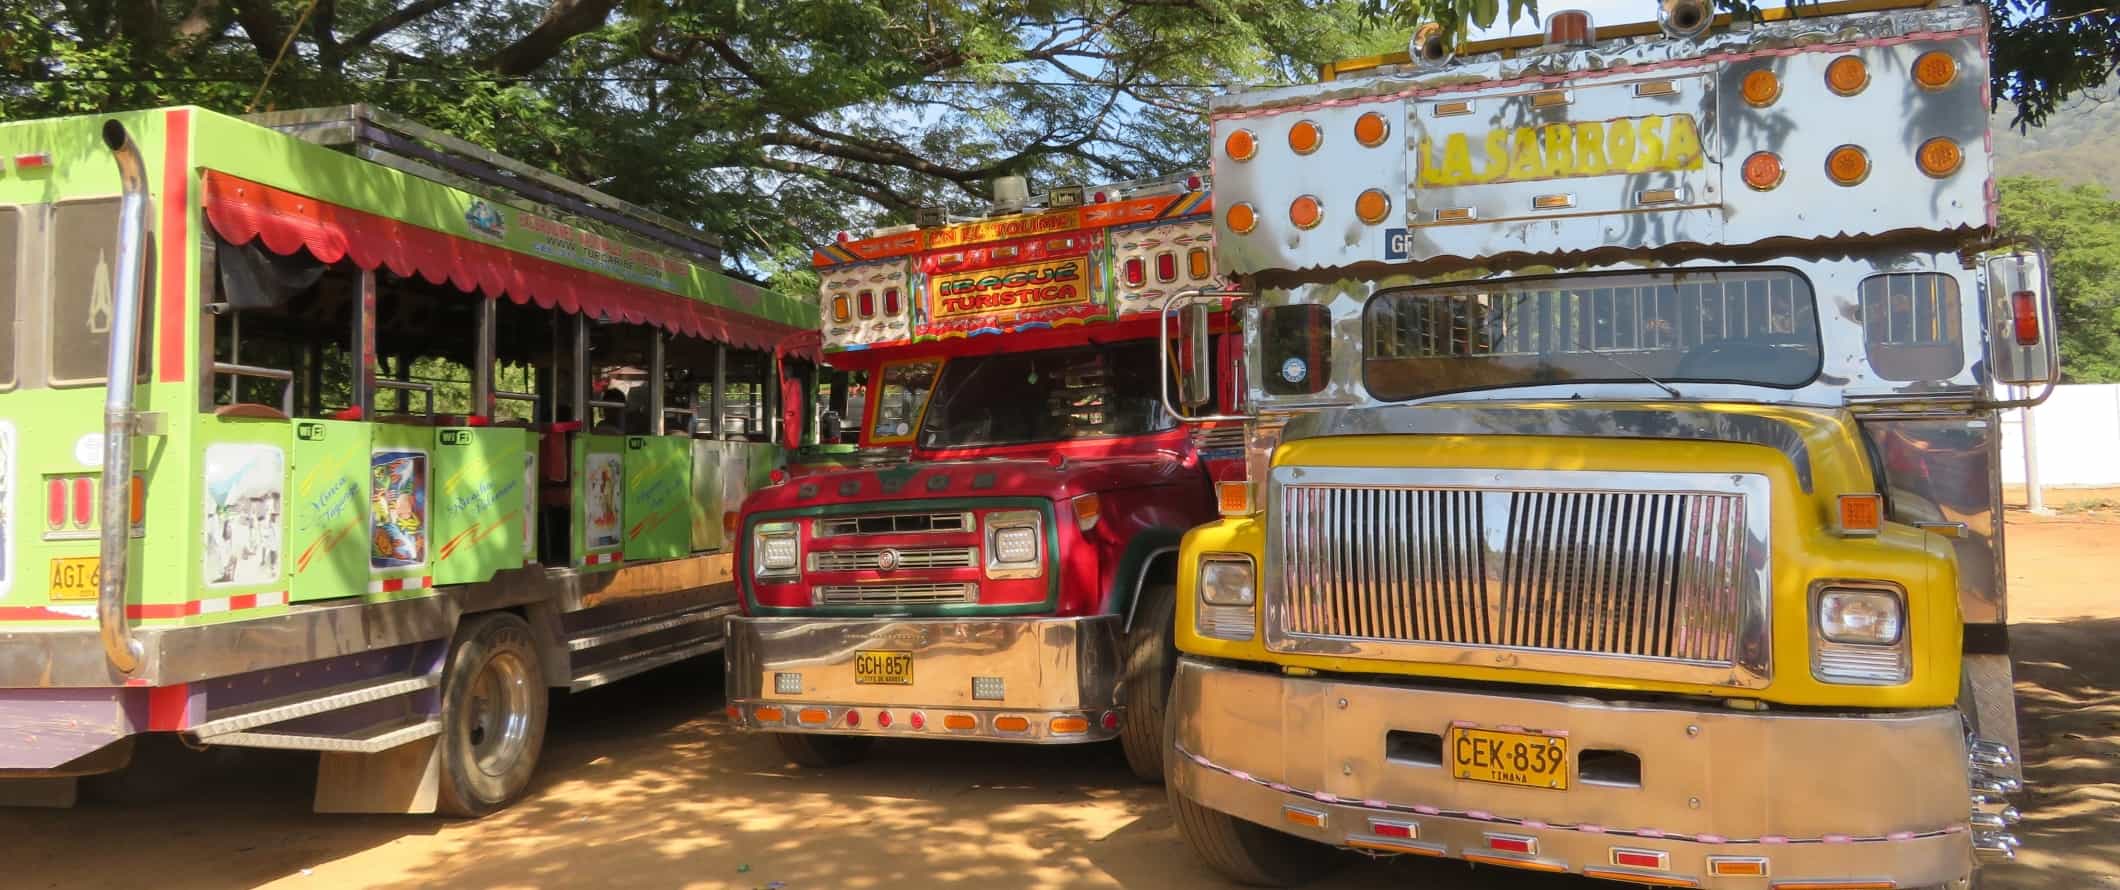 Brightly colored buses and trucks lined up under trees ready to take passengers throughout Colombia